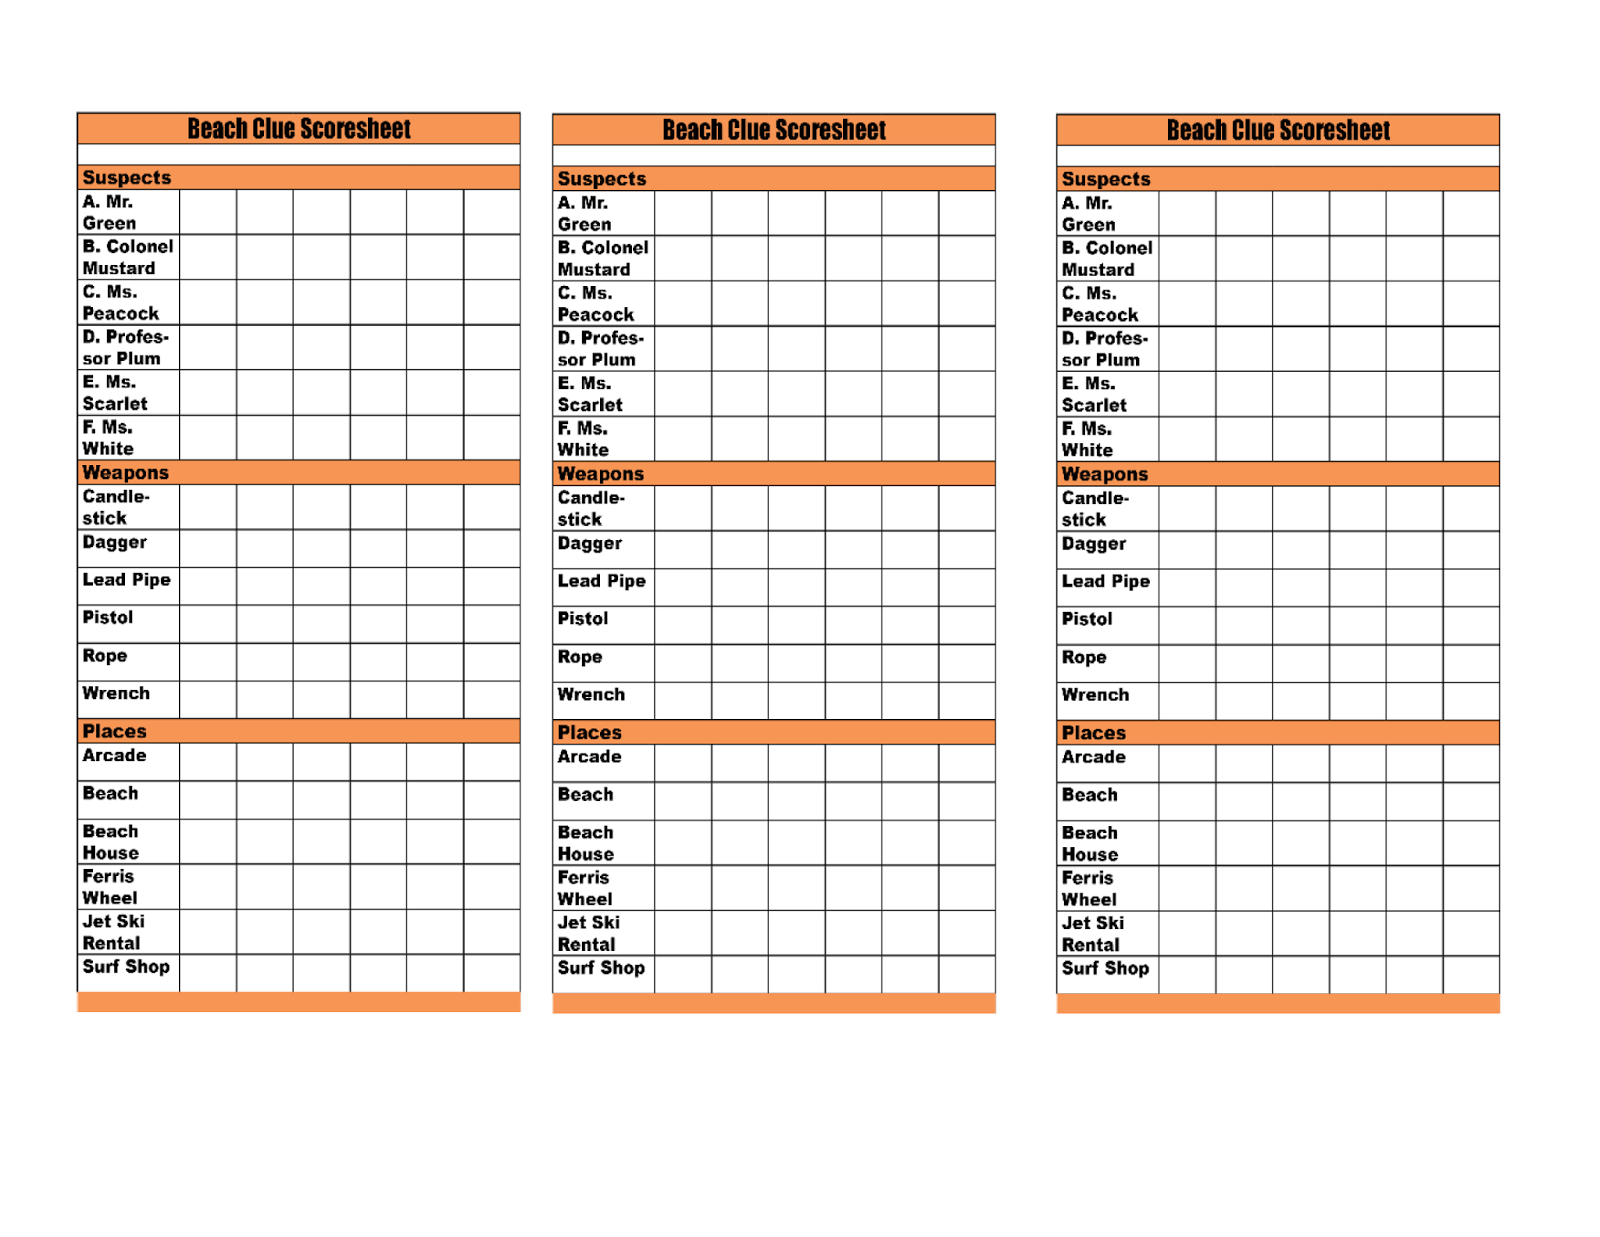 time-to-talk-about-it-clue-2013-manor-beach-score-sheets